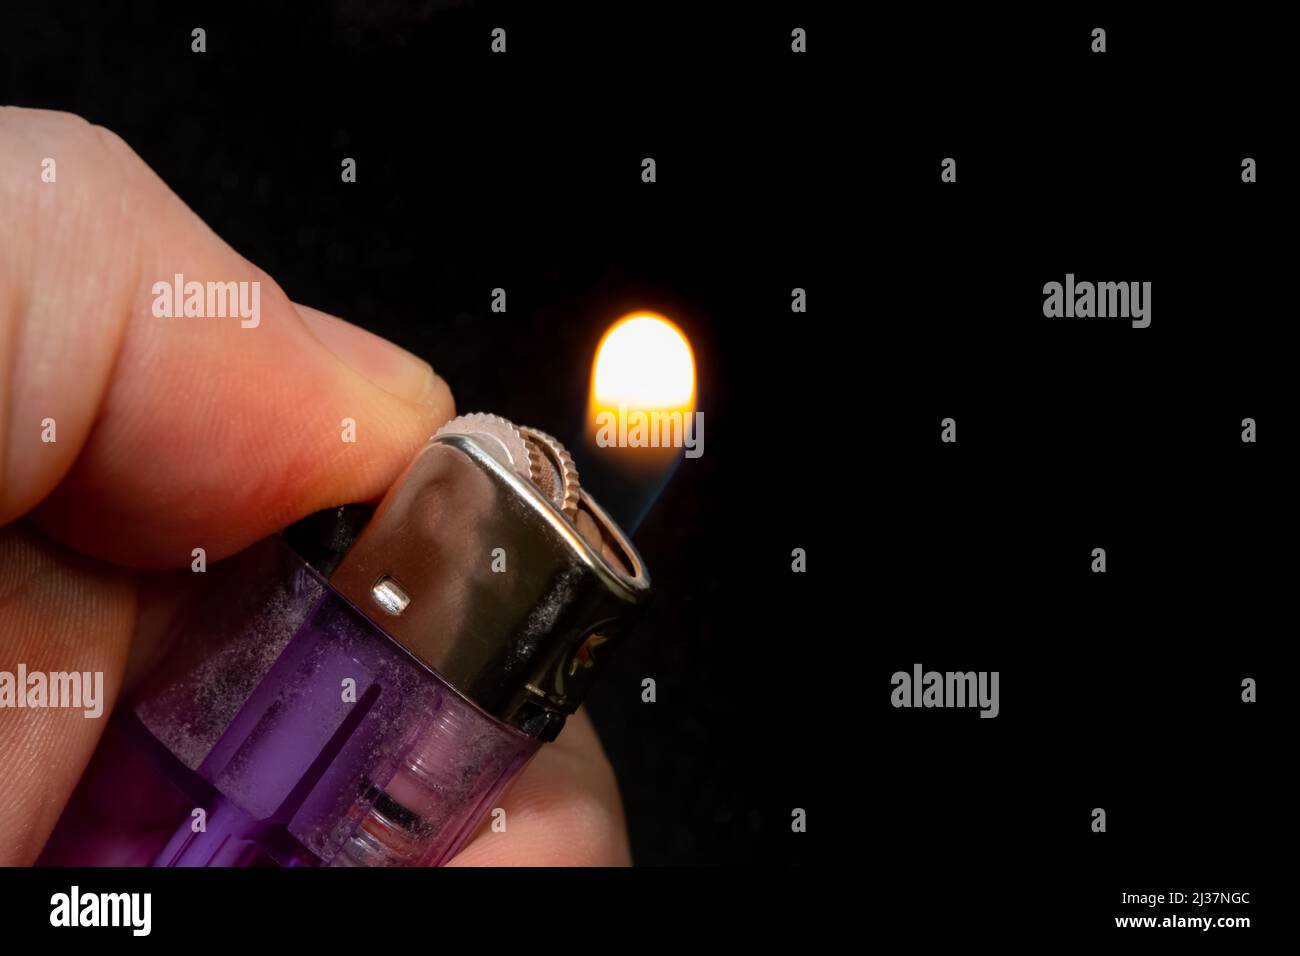 Lighting a lighter close-up. Transparent purple plastic gas chamber lighter lit by a hand. Stock Photo